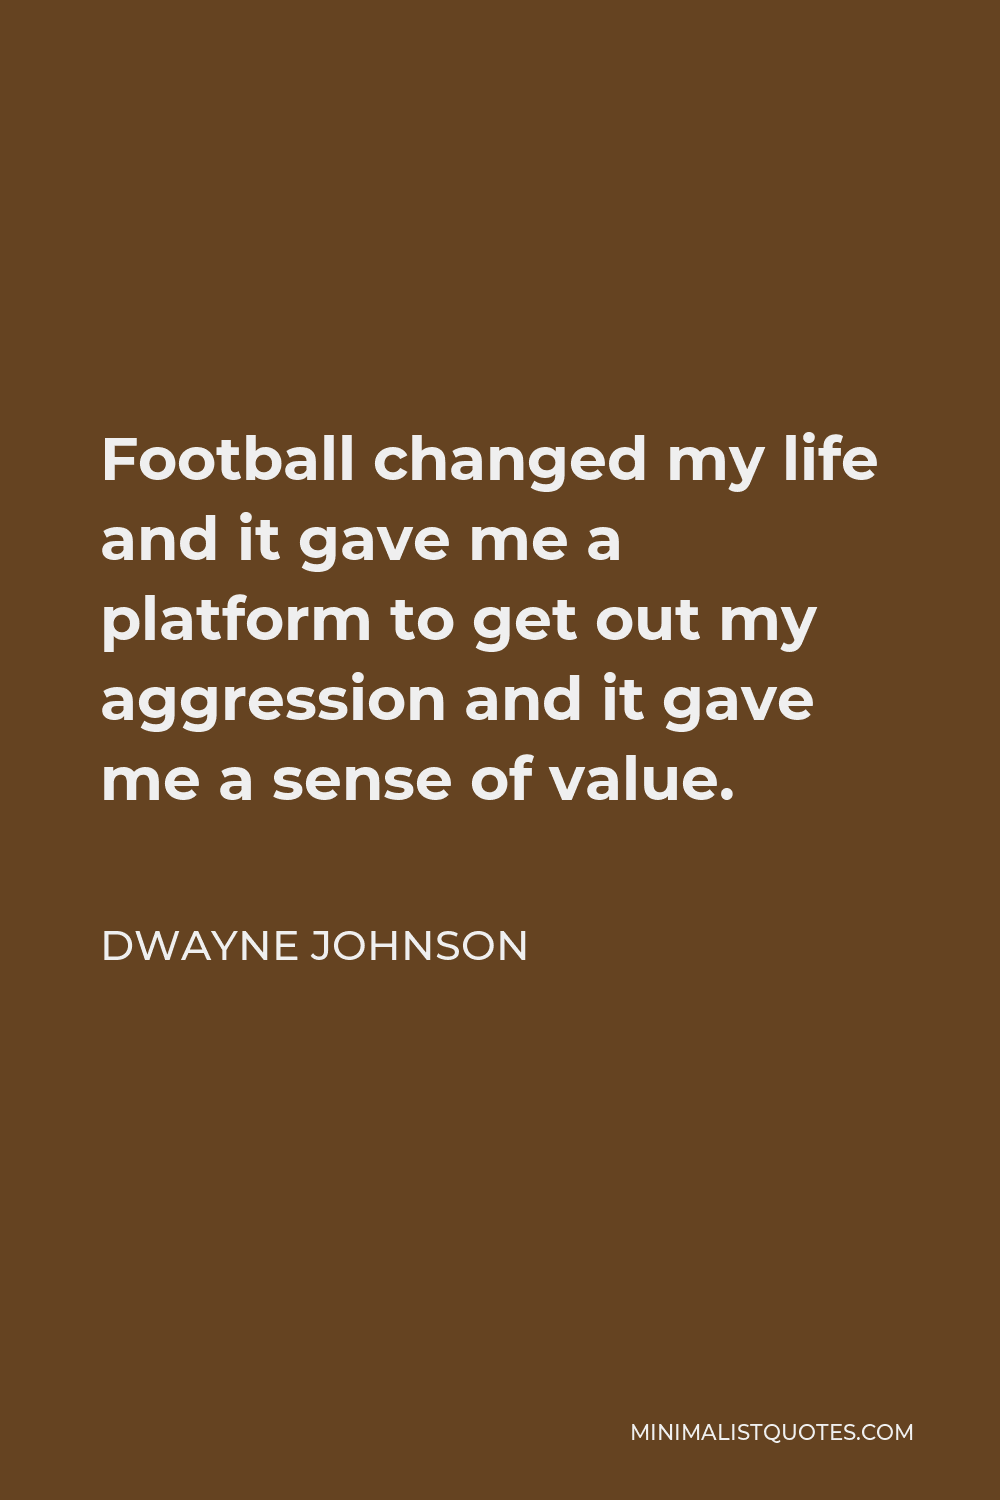 Dwayne Johnson Quote - Football changed my life and it gave me a platform to get out my aggression and it gave me a sense of value.